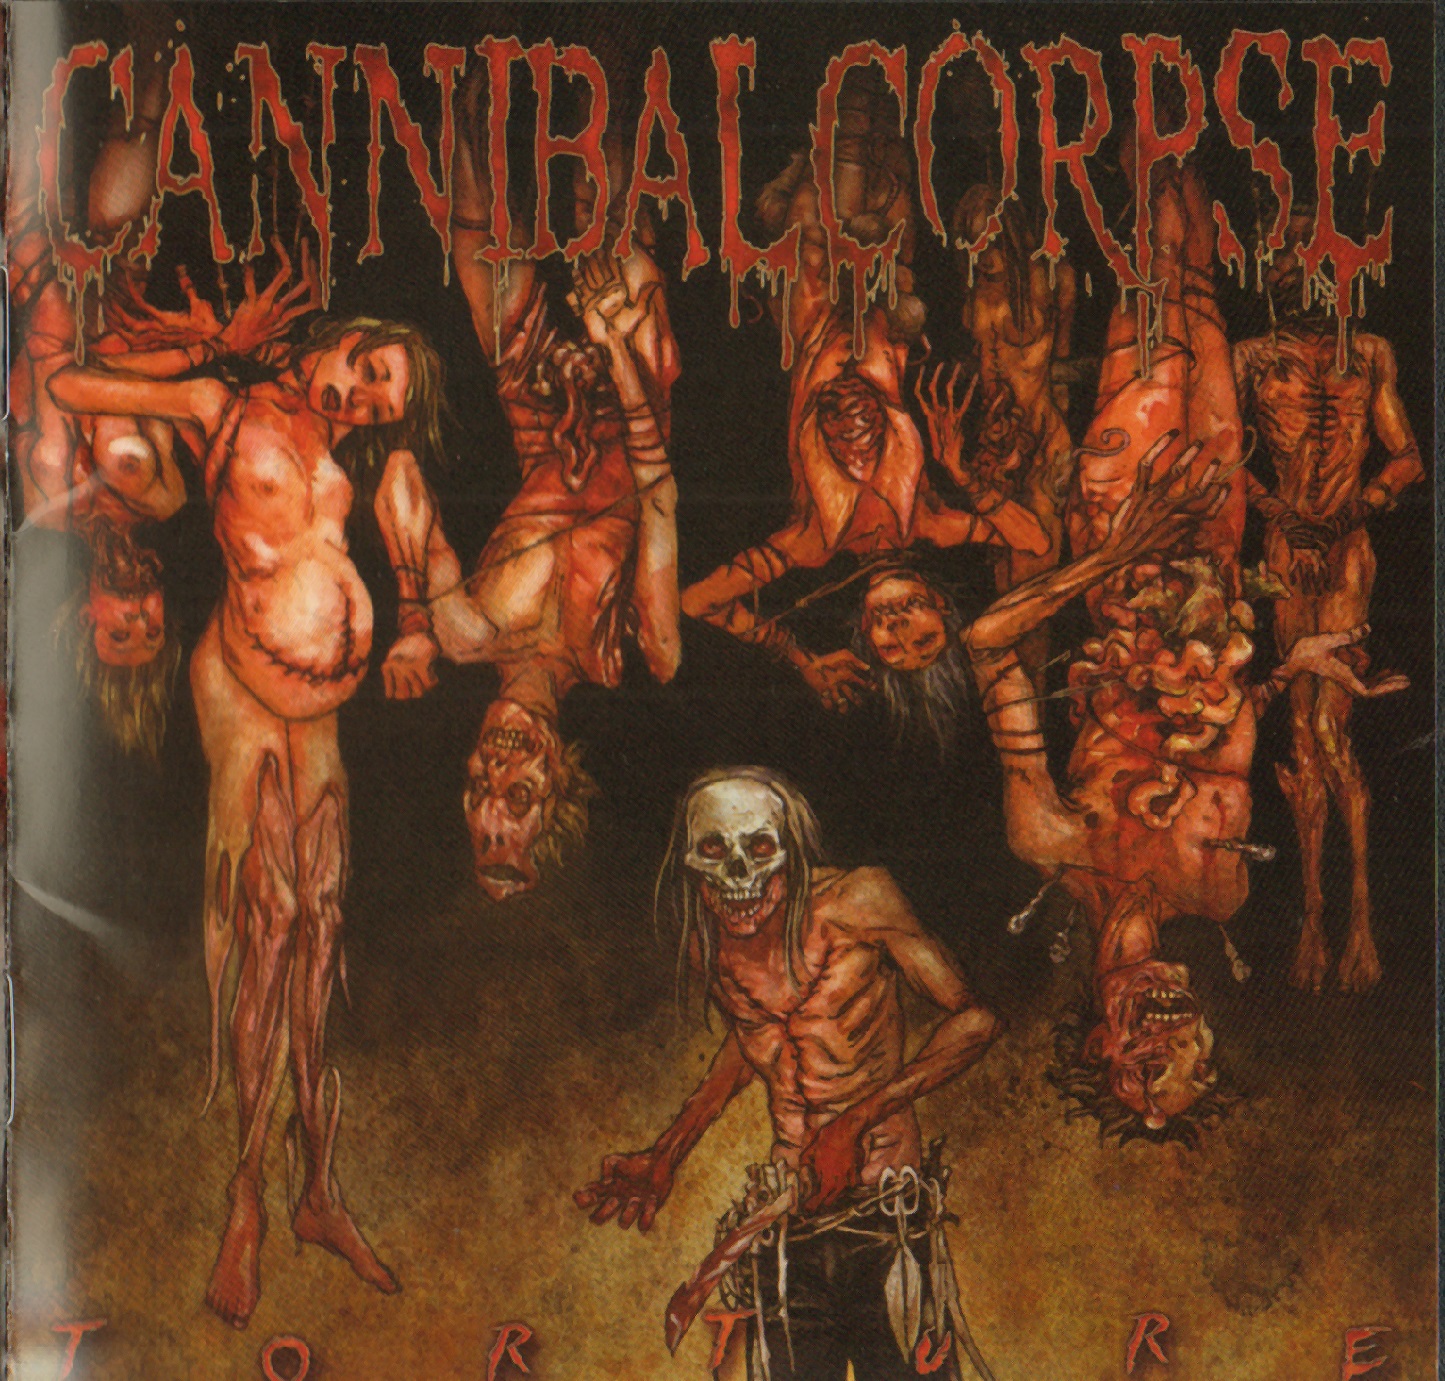 [Death Meta] Cannibal Corpse - Discography (1990 - 2021)